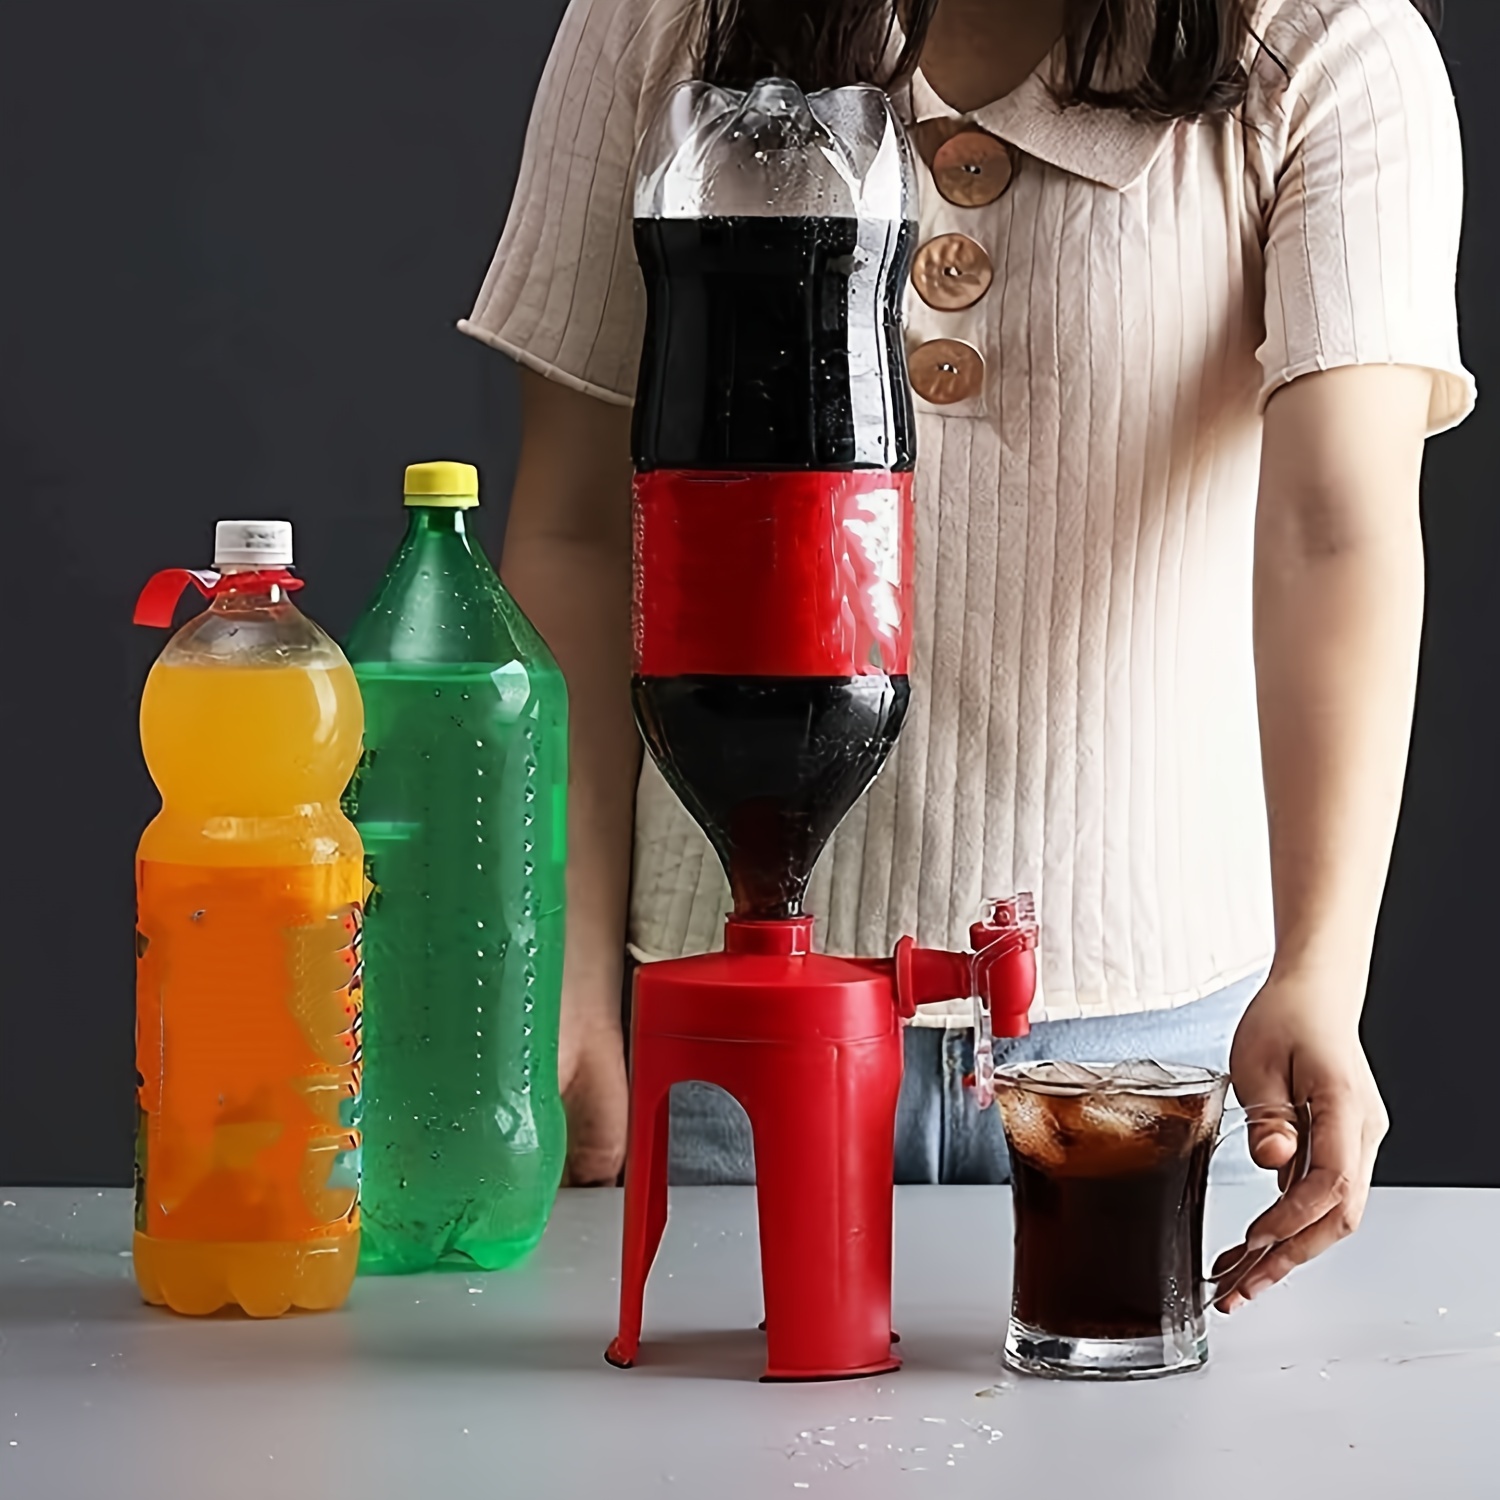 9 Awesome Beverage Dispensers for Parties